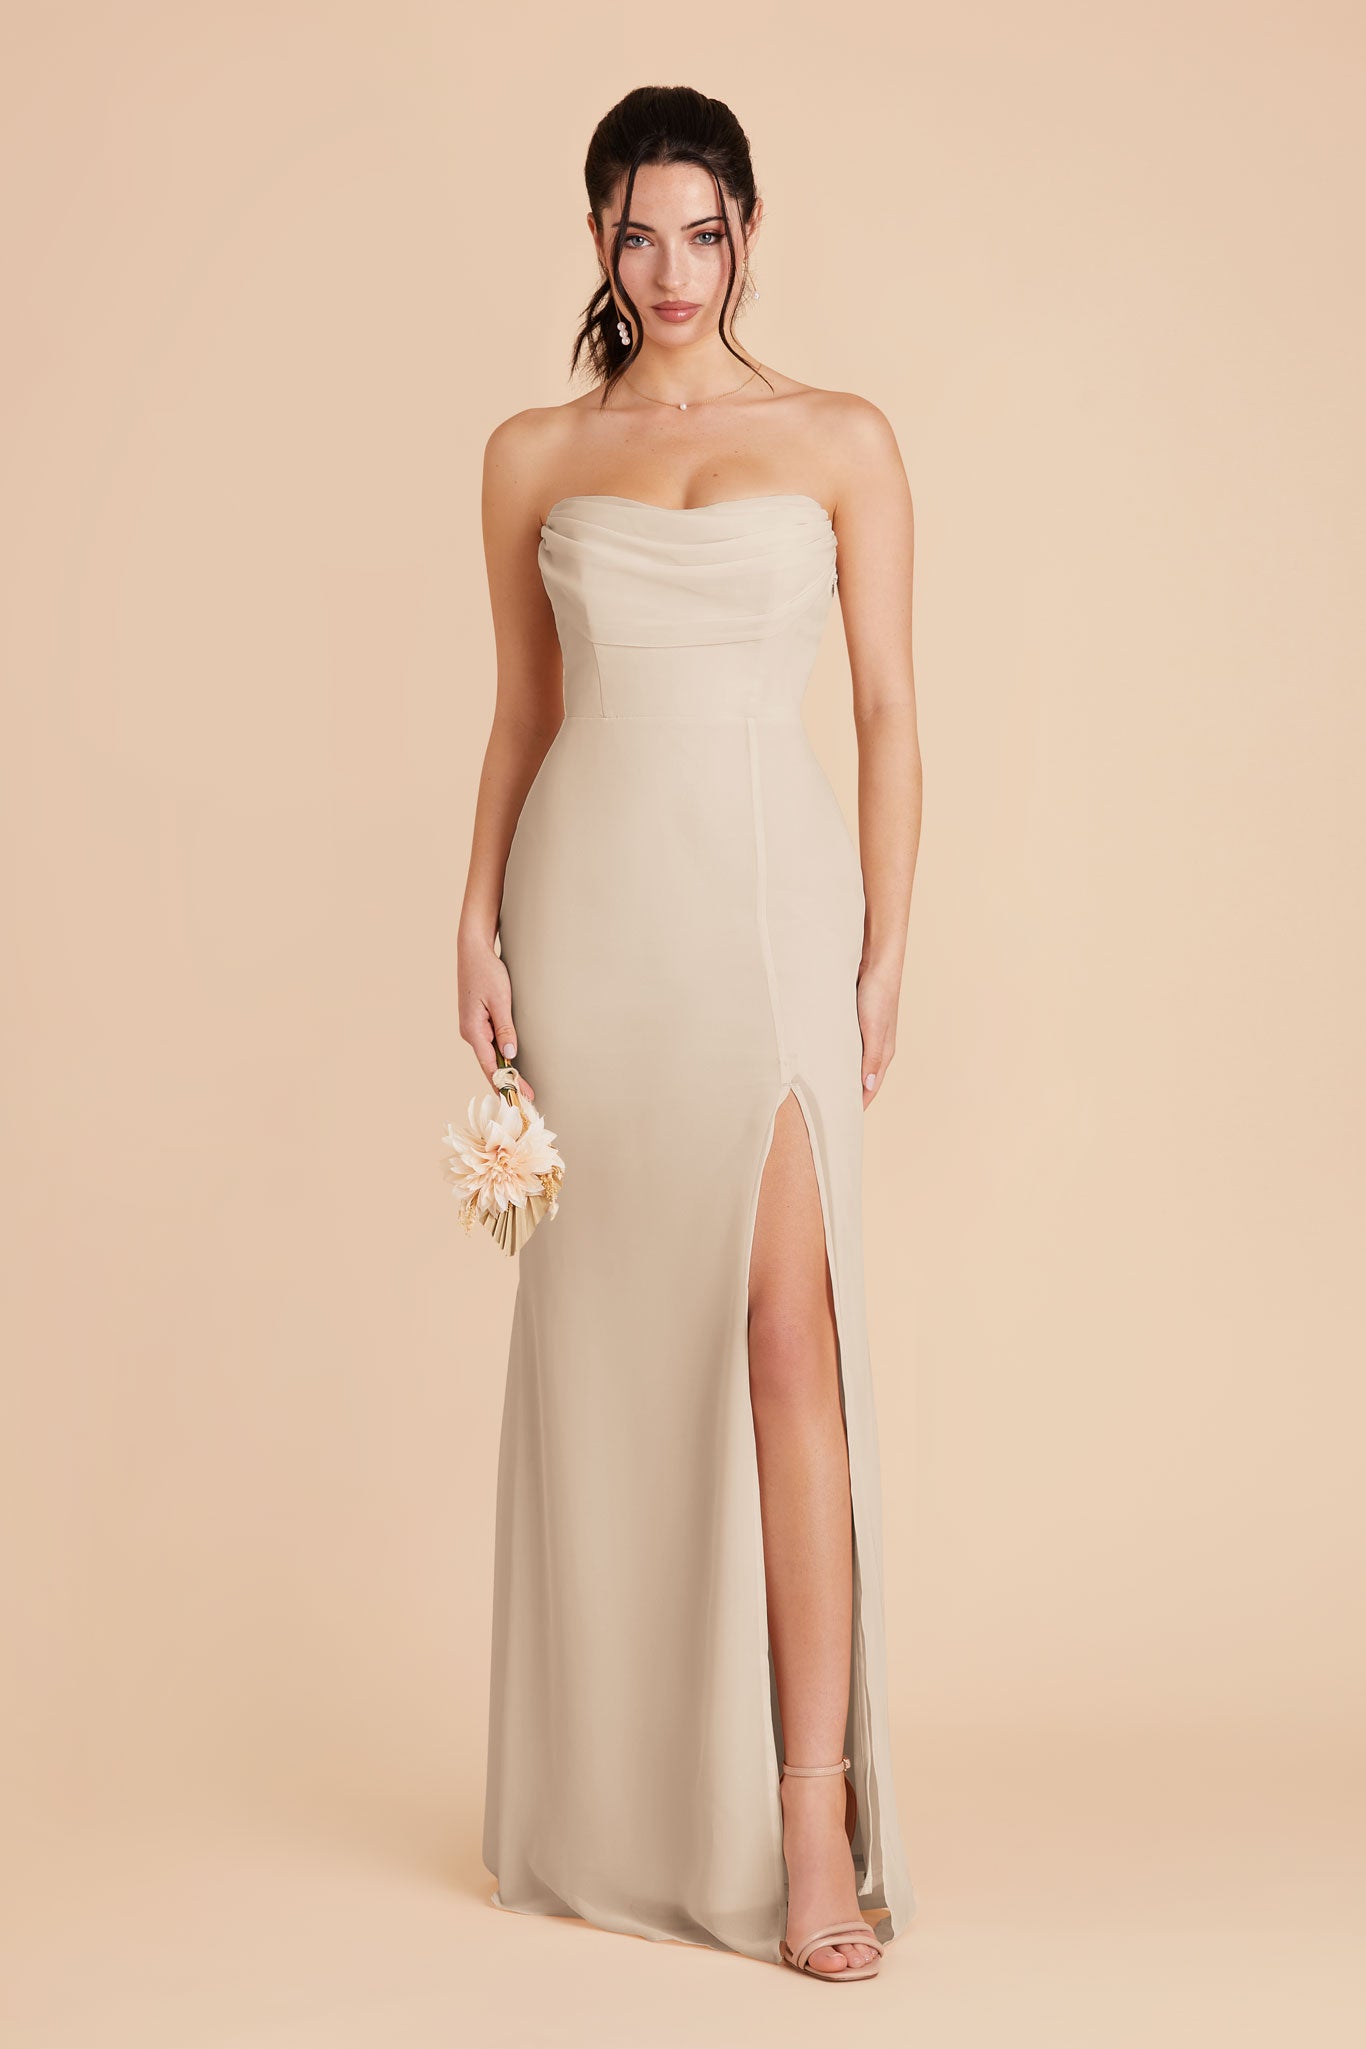 Neutral Champagne Mira Convertible Dress by Birdy Grey